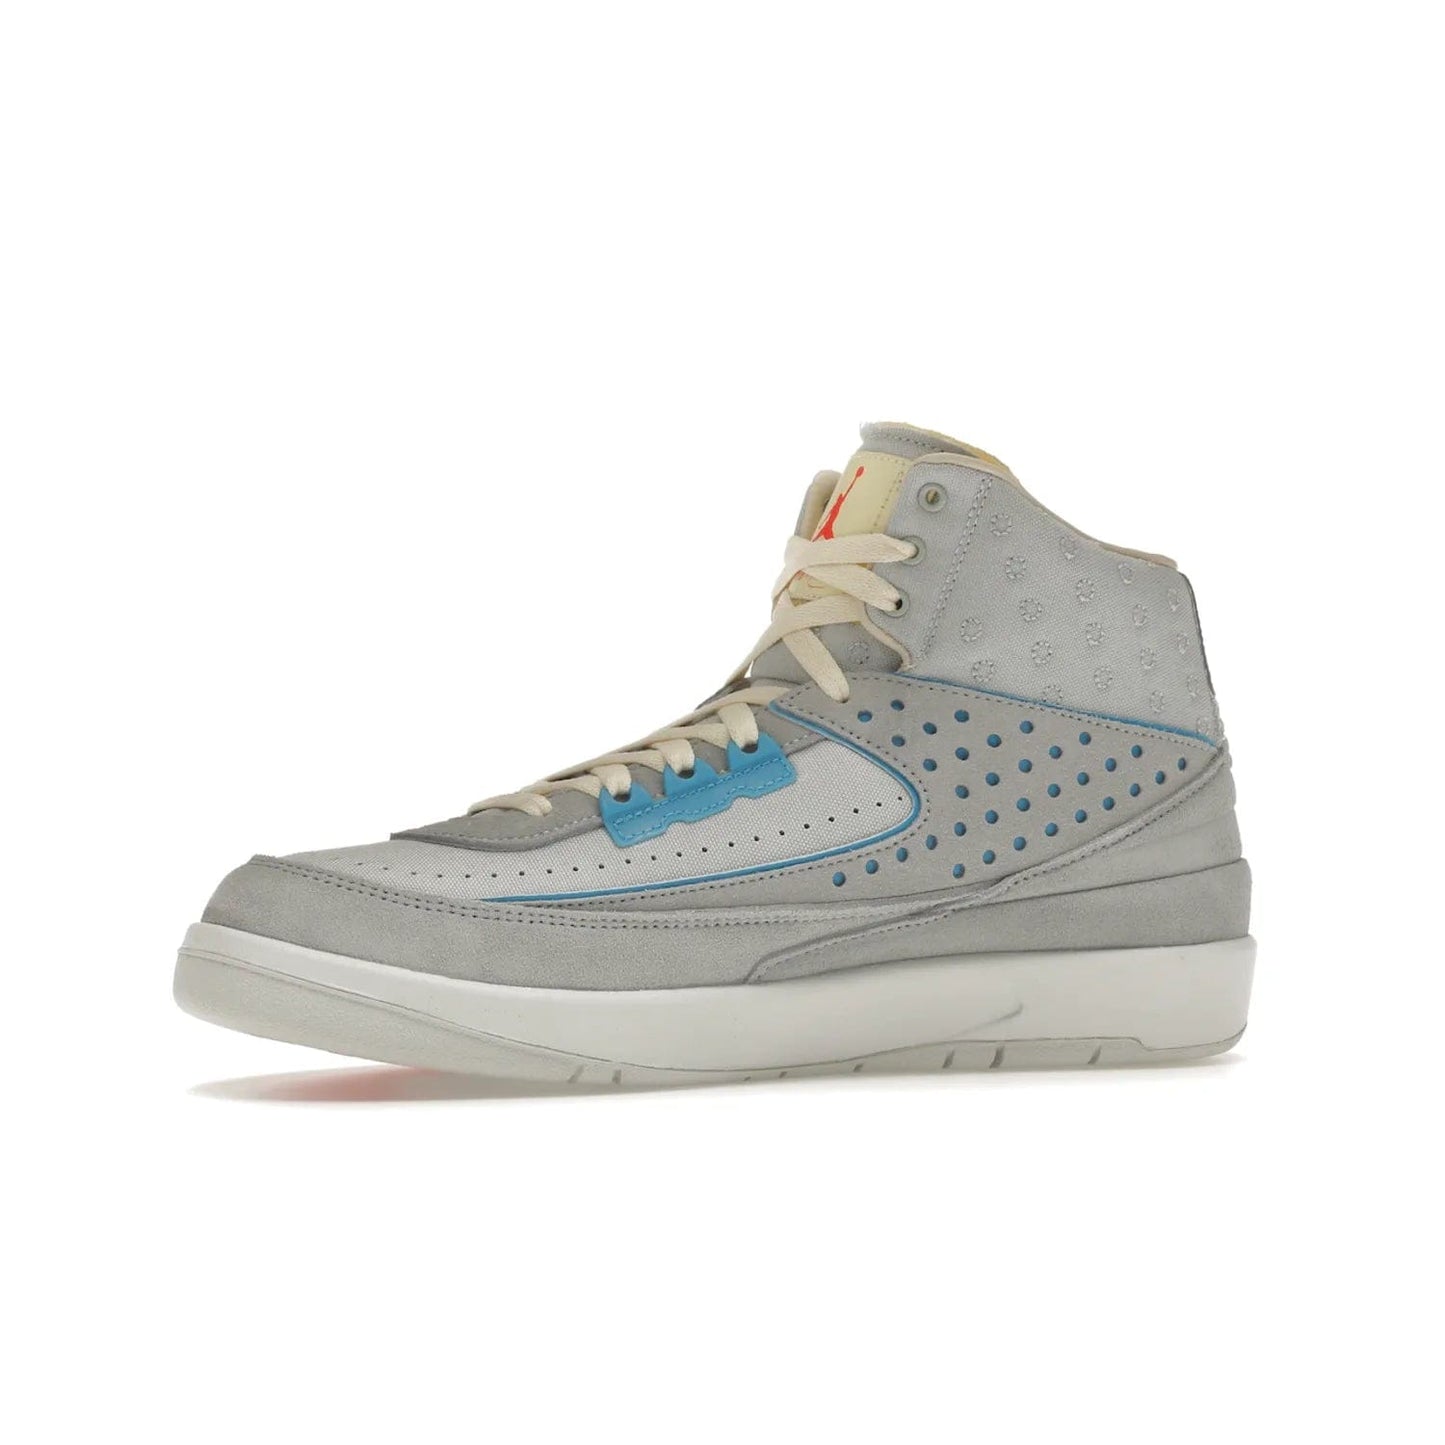 Jordan 2 Retro SP Union Grey Fog - Image 17 - Only at www.BallersClubKickz.com - Introducing the Air Jordan 2 Retro SP Union Grey Fog. This intricate sneaker design features a grey canvas upper with light blue eyelets, eyestay patches, and piping, plus custom external tags. Dropping in April 2022, this exclusive release offers a worn-in look and feel.